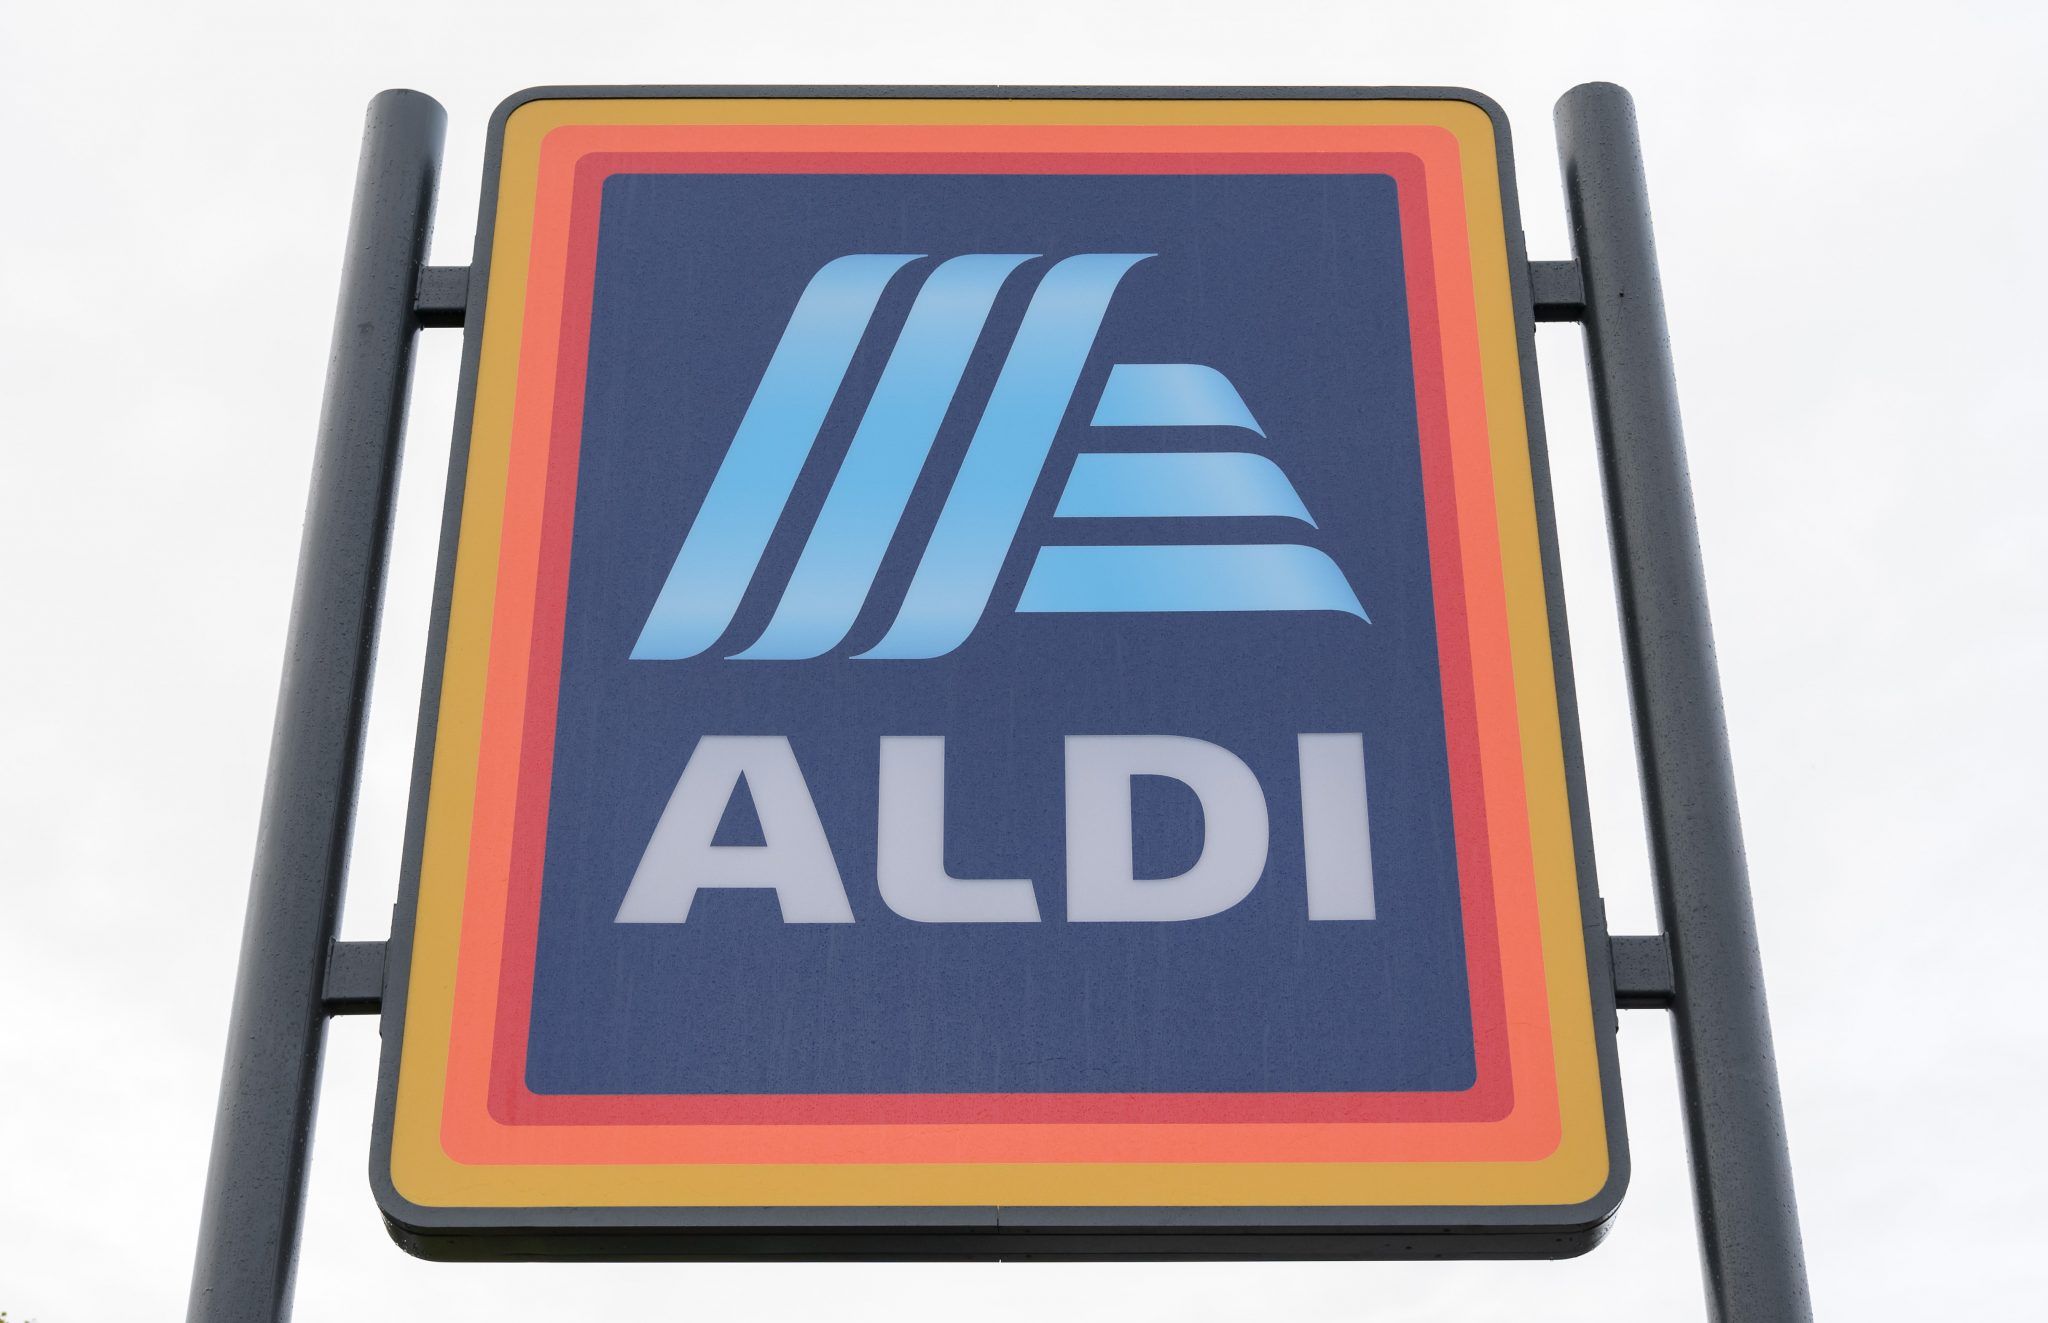 Aldi looking to hire over 1,000 new workers in 2021